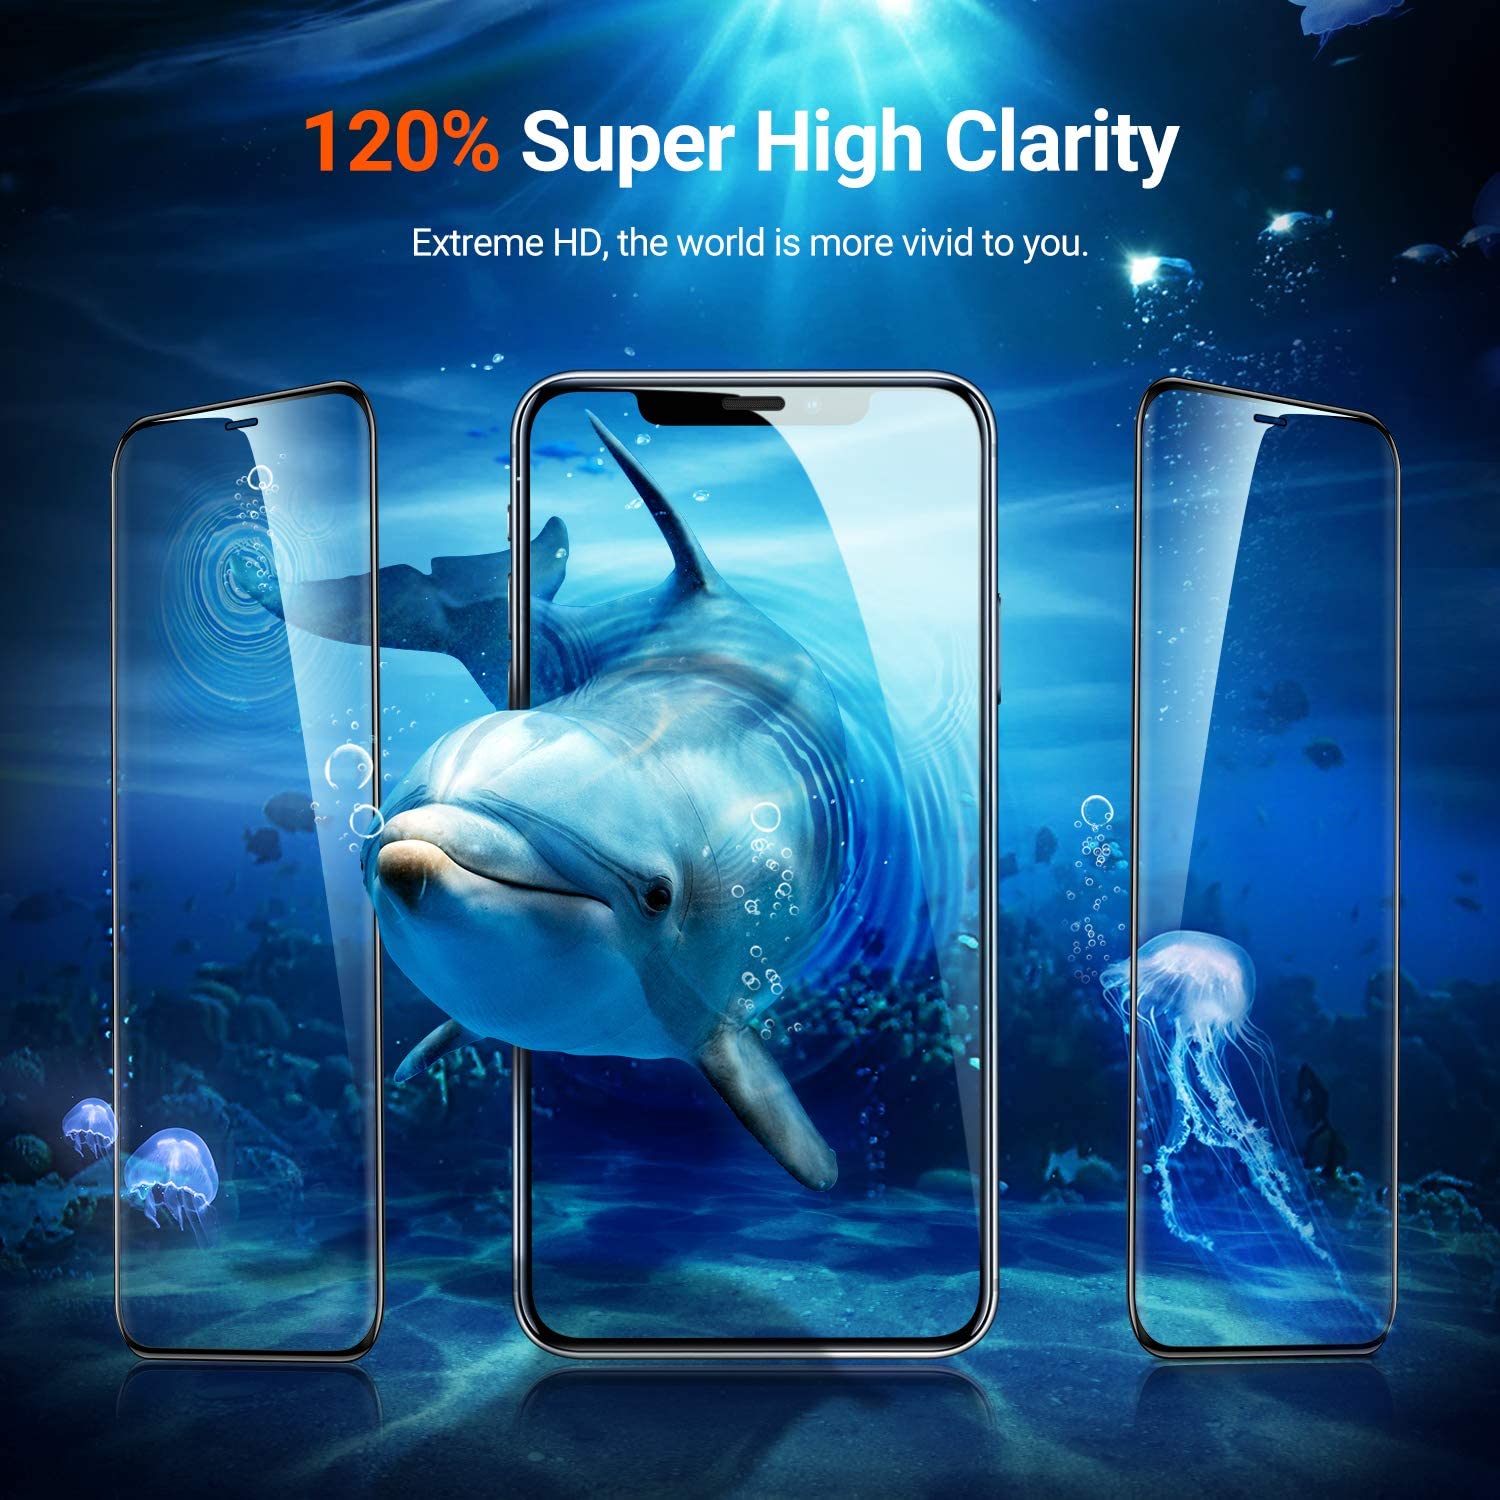 Diamonds Hard for iPhone 11 XR X XS Pro Max Screen Protector, Clear Tempered Glass Screen Protector Film for iPhone 6 6S 7 8 - 200002107 Find Epic Store